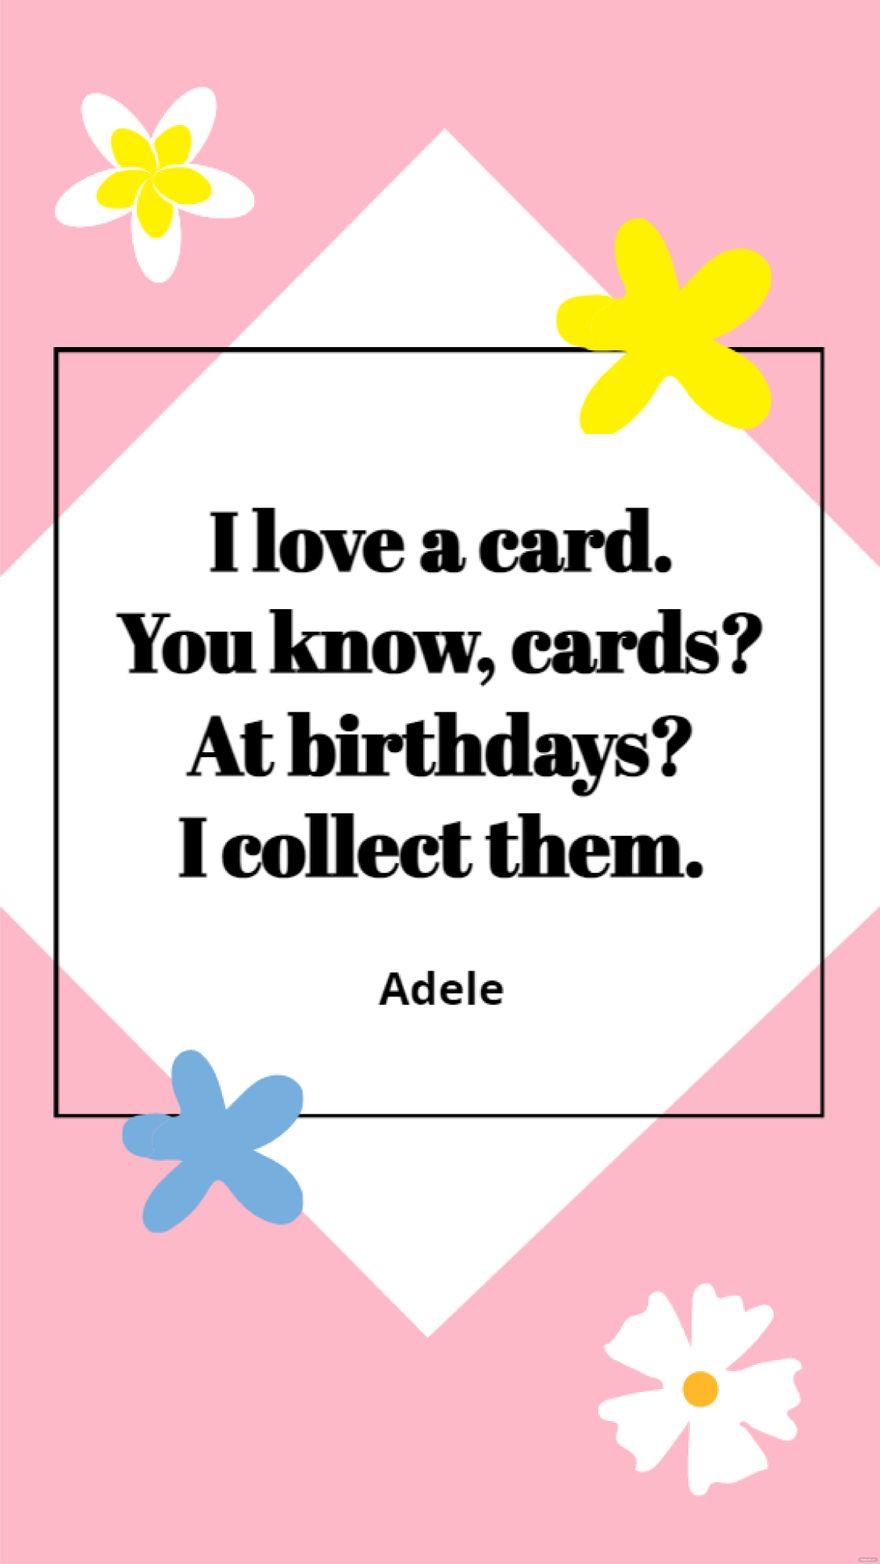 Free Adele - I love a card. You know, cards? At birthdays? I collect them. in JPG